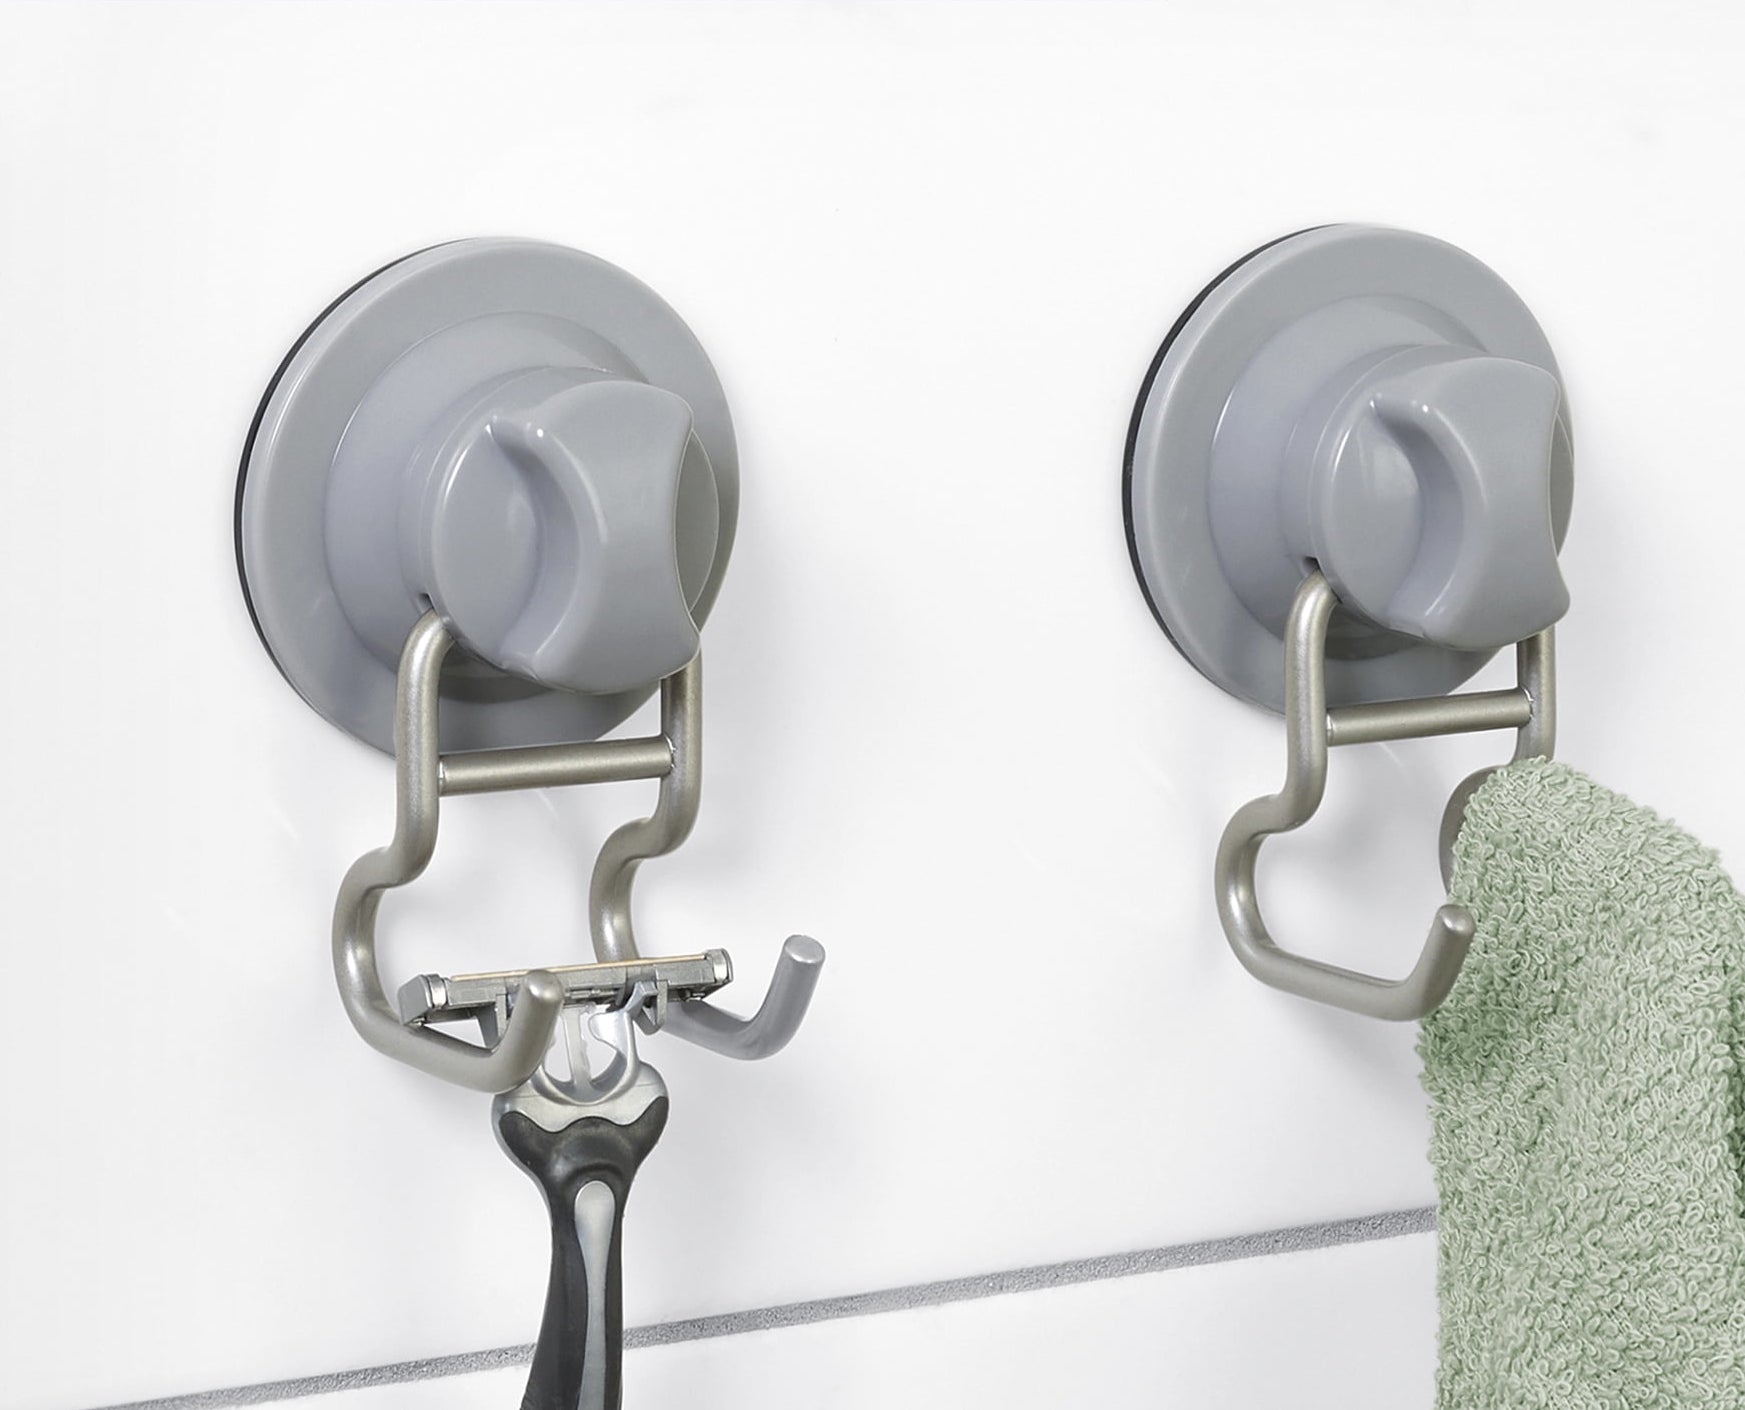 Two suction-cup hooks holding a razor and towel, labeled as &quot;Rust Resistant&quot; and &quot;2 PACK&quot;